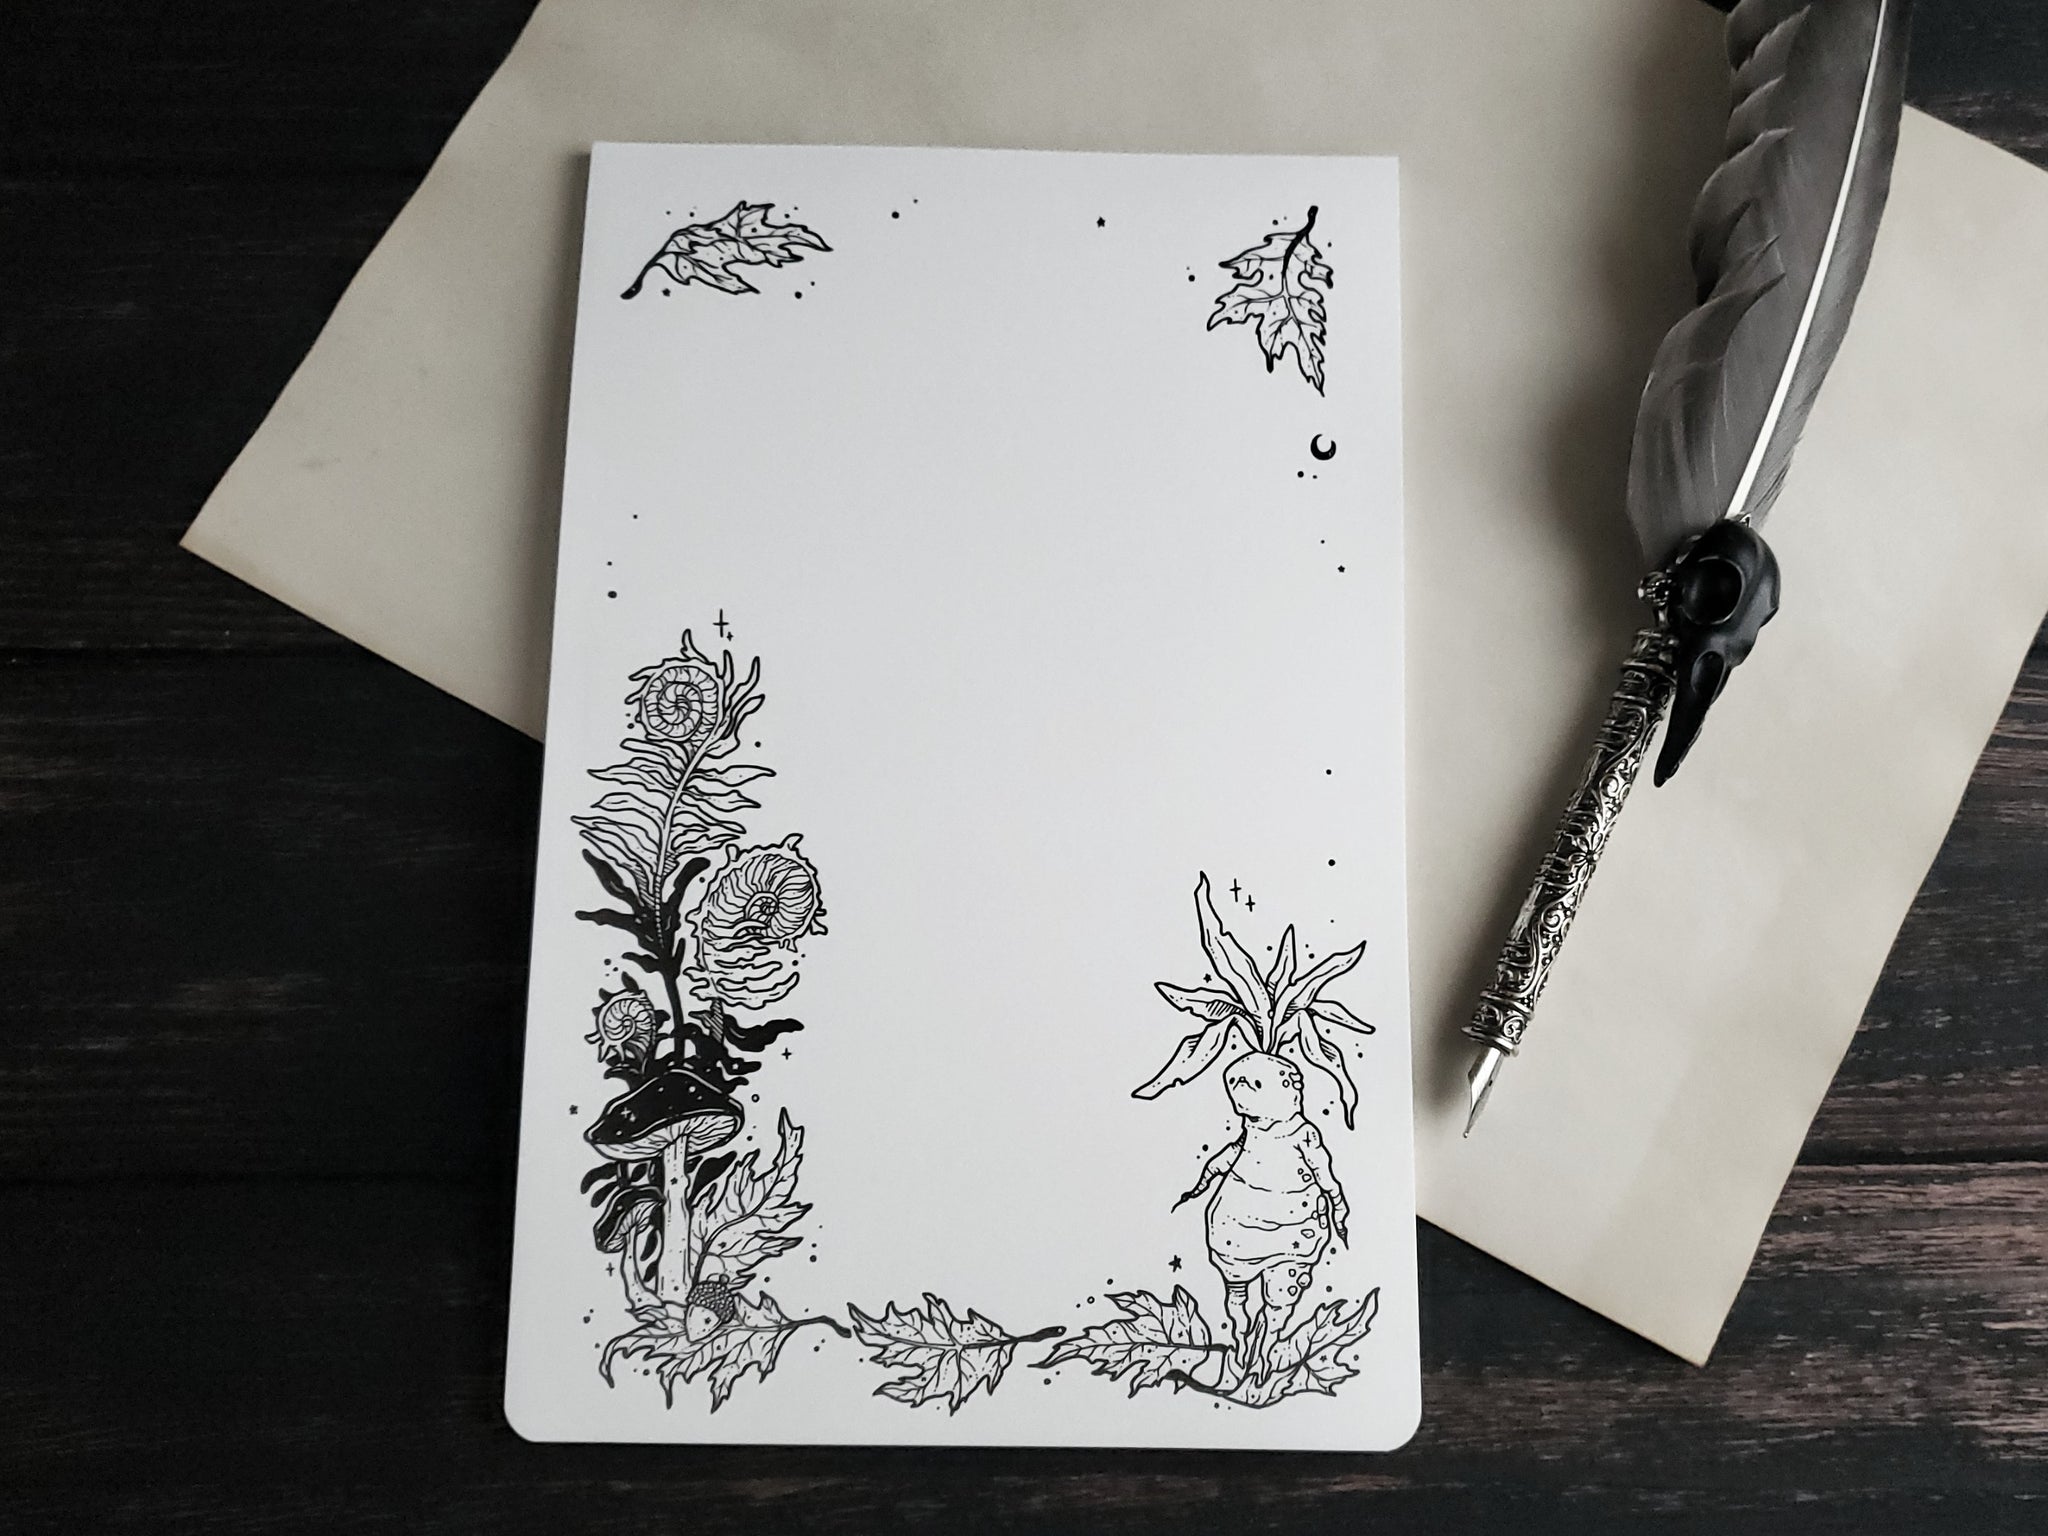 Enchanted Forest Note Pad